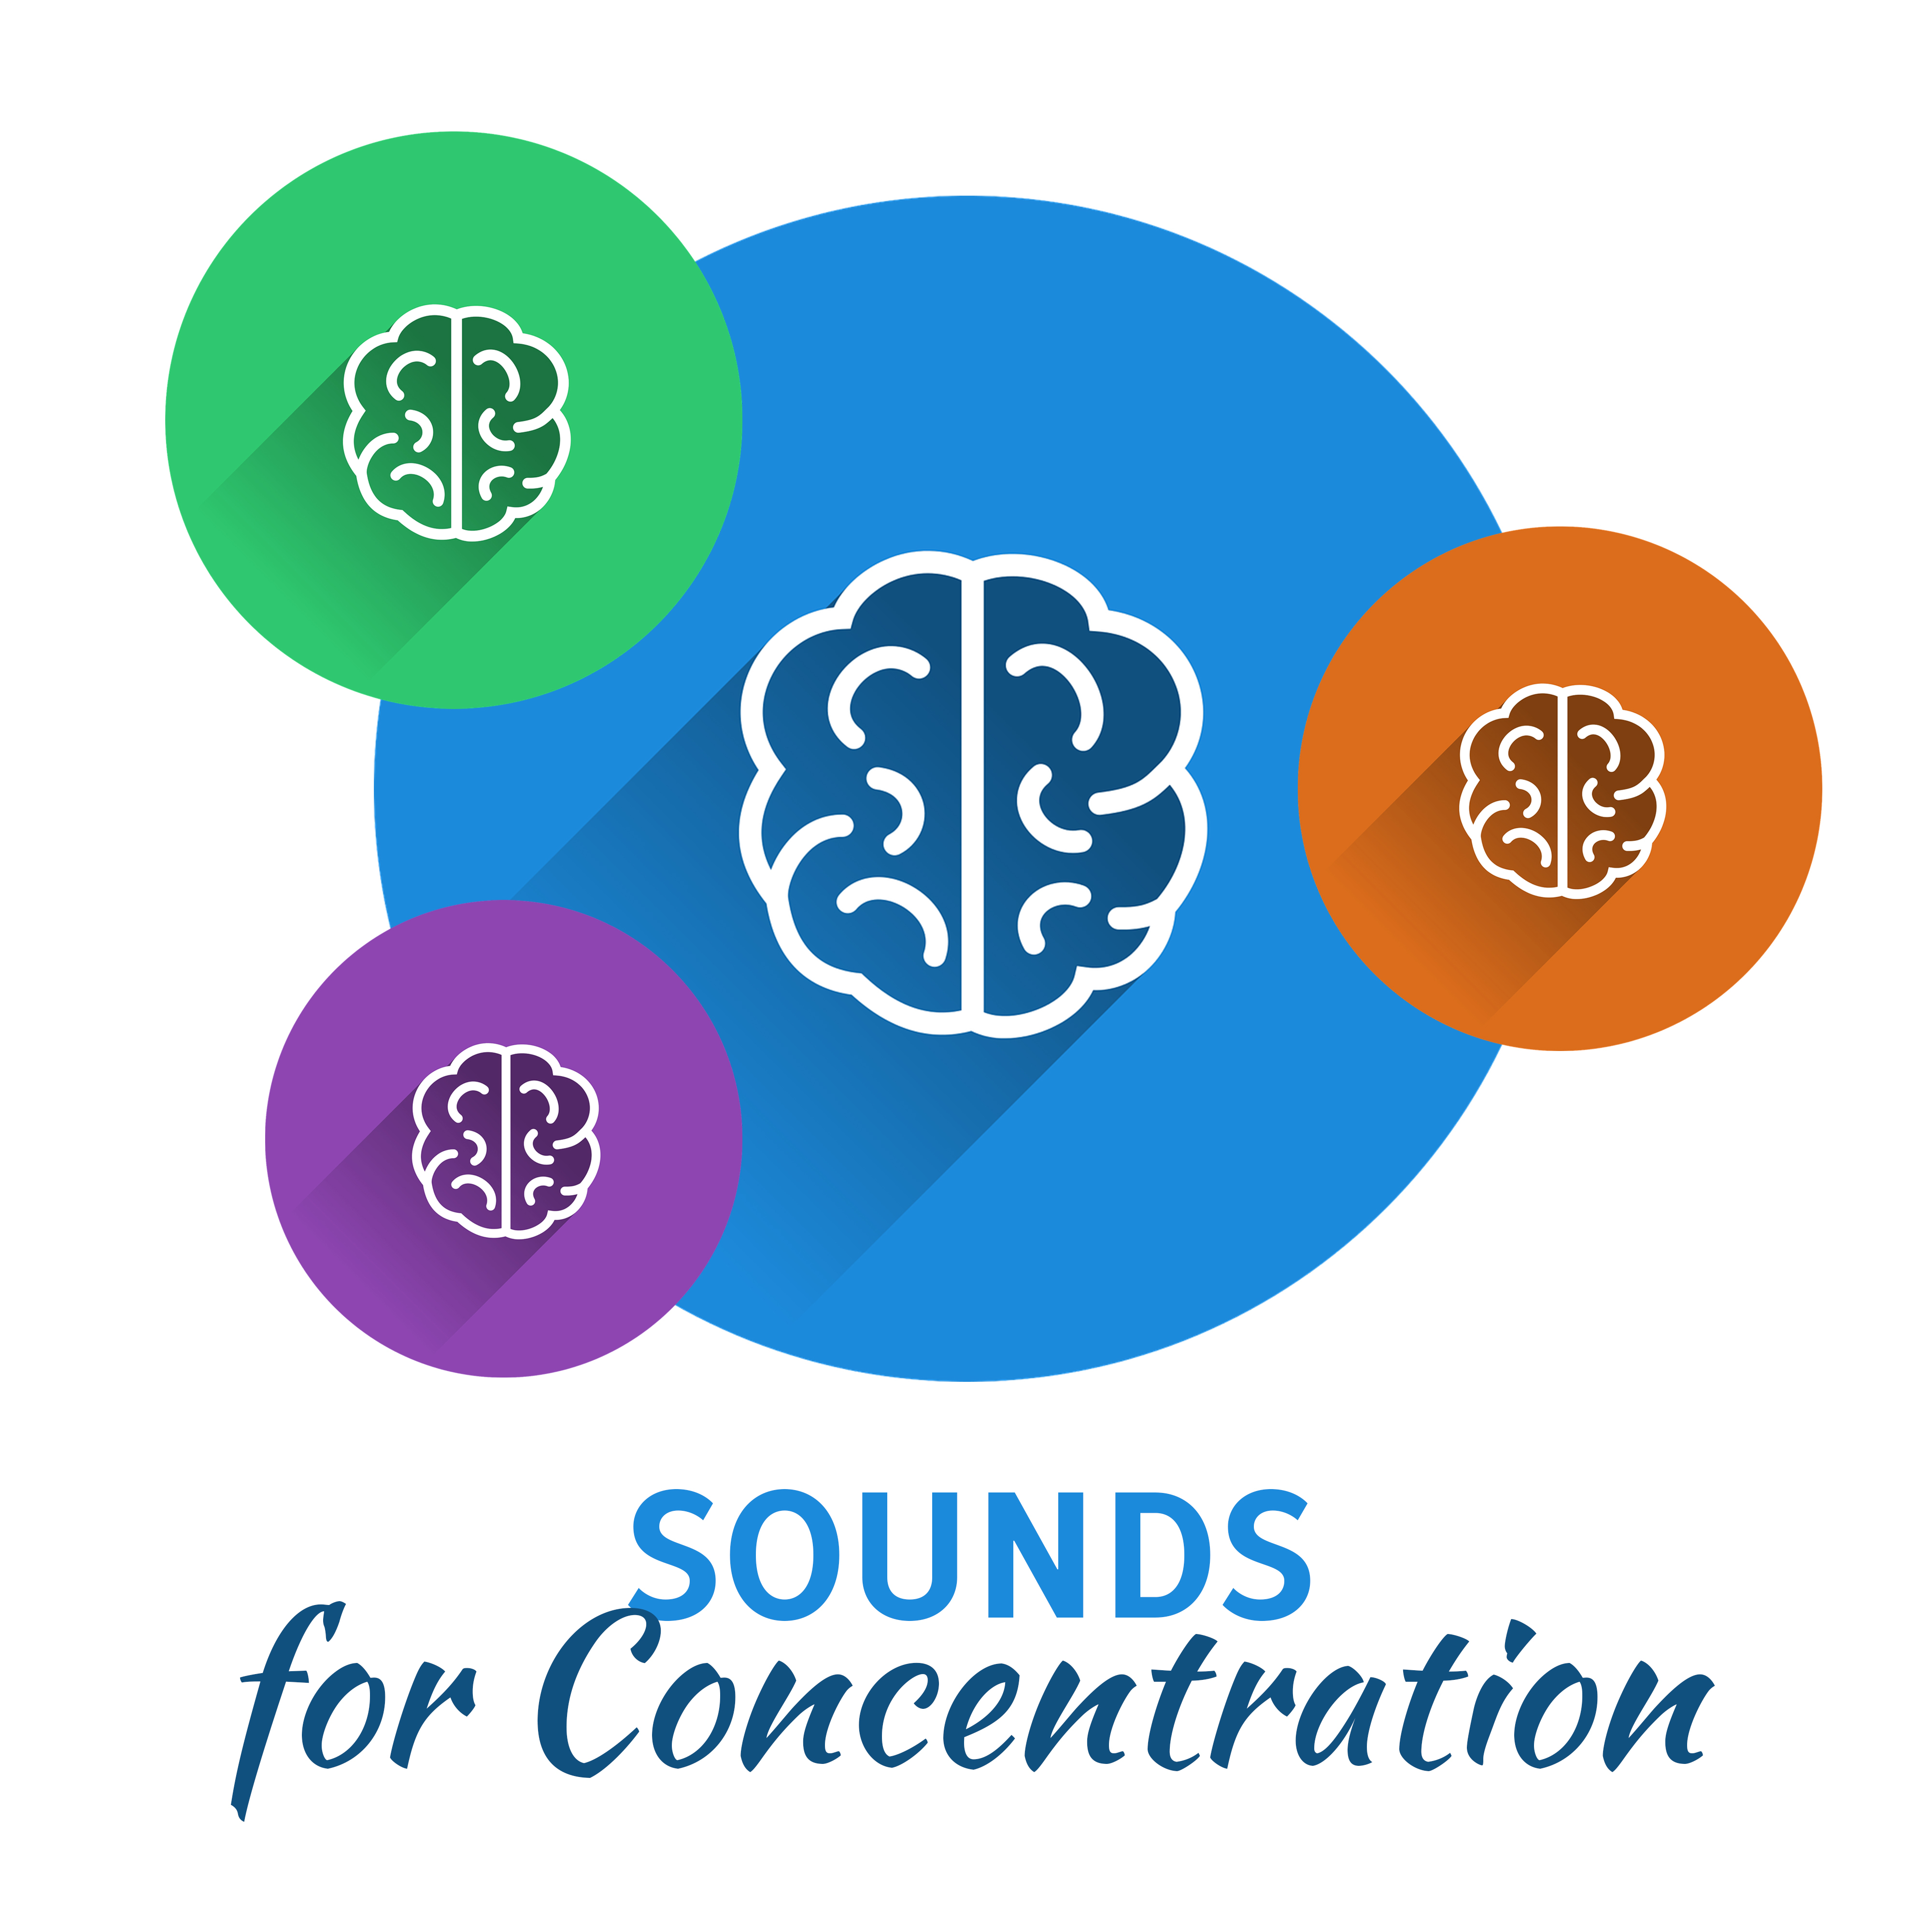 Sounds for Concentration – Classical Music for Study, Brain Power, Mozart Reduces Stress, Deep Focus, Easier Work